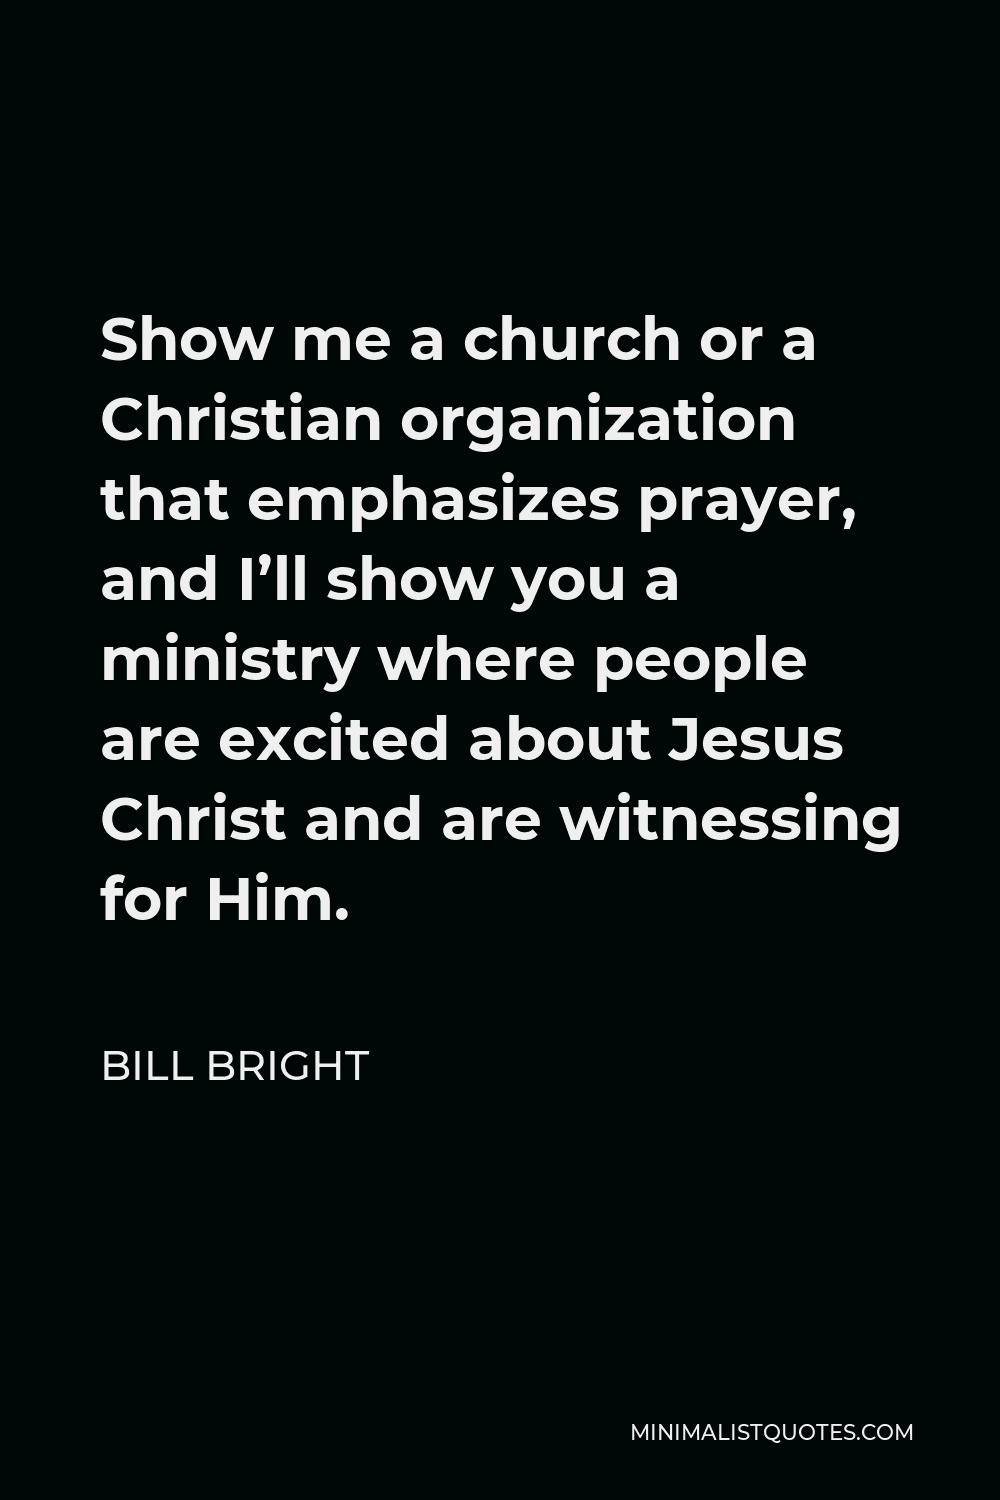 Bill Bright Quote - Show me a church or a Christian organization that emphasizes prayer, and I’ll show you a ministry where people are excited about Jesus Christ and are witnessing for Him.